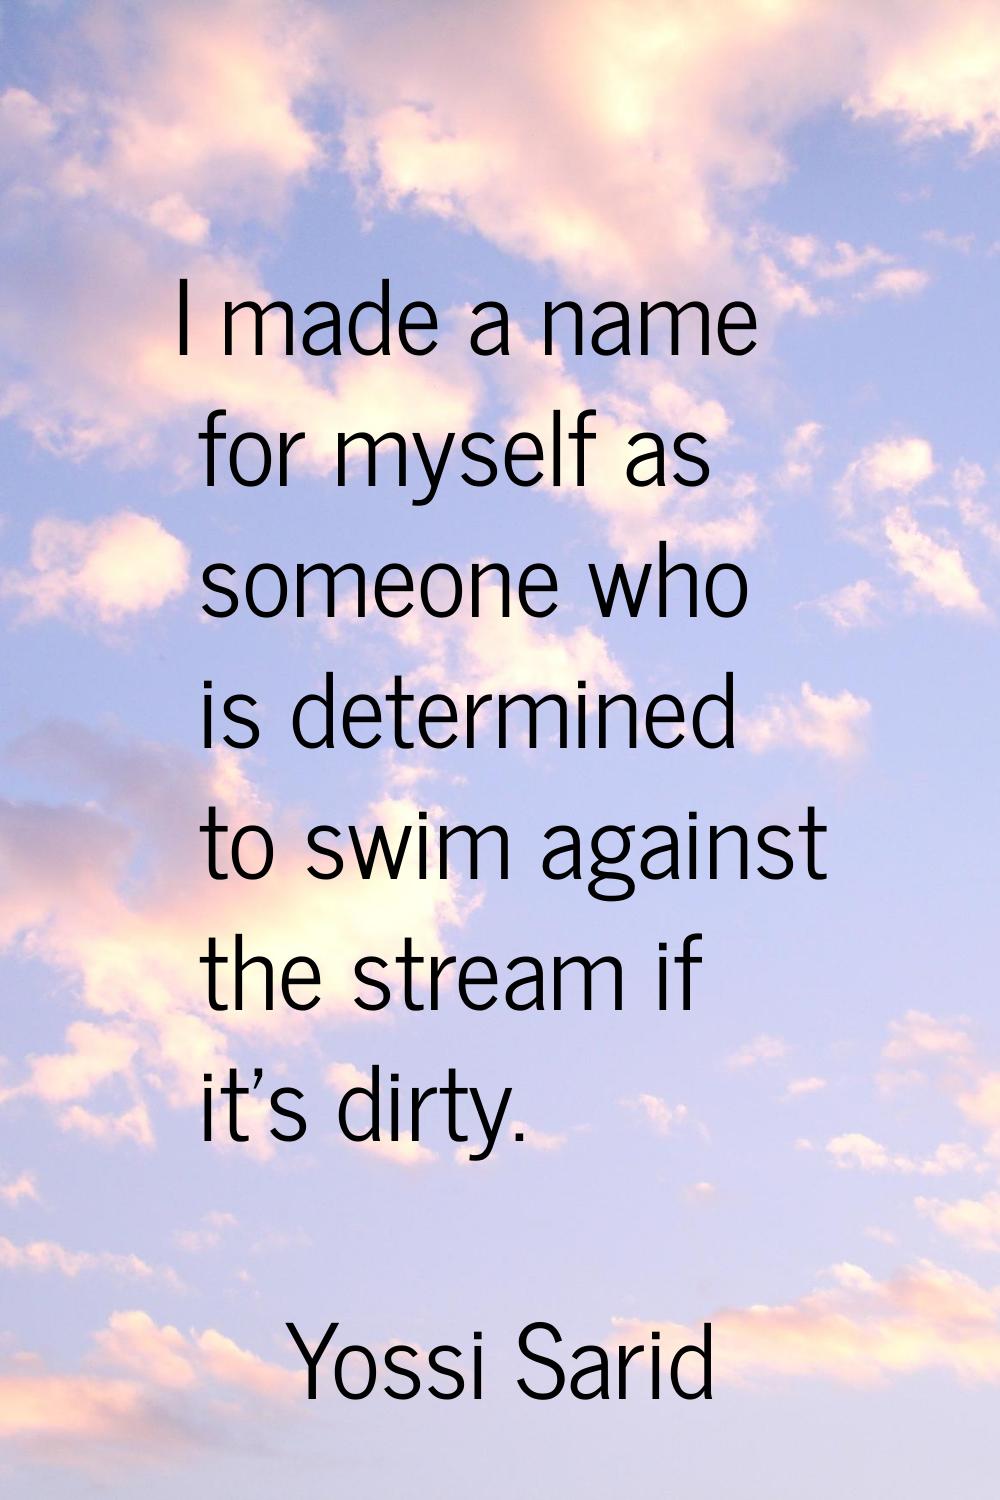 I made a name for myself as someone who is determined to swim against the stream if it's dirty.